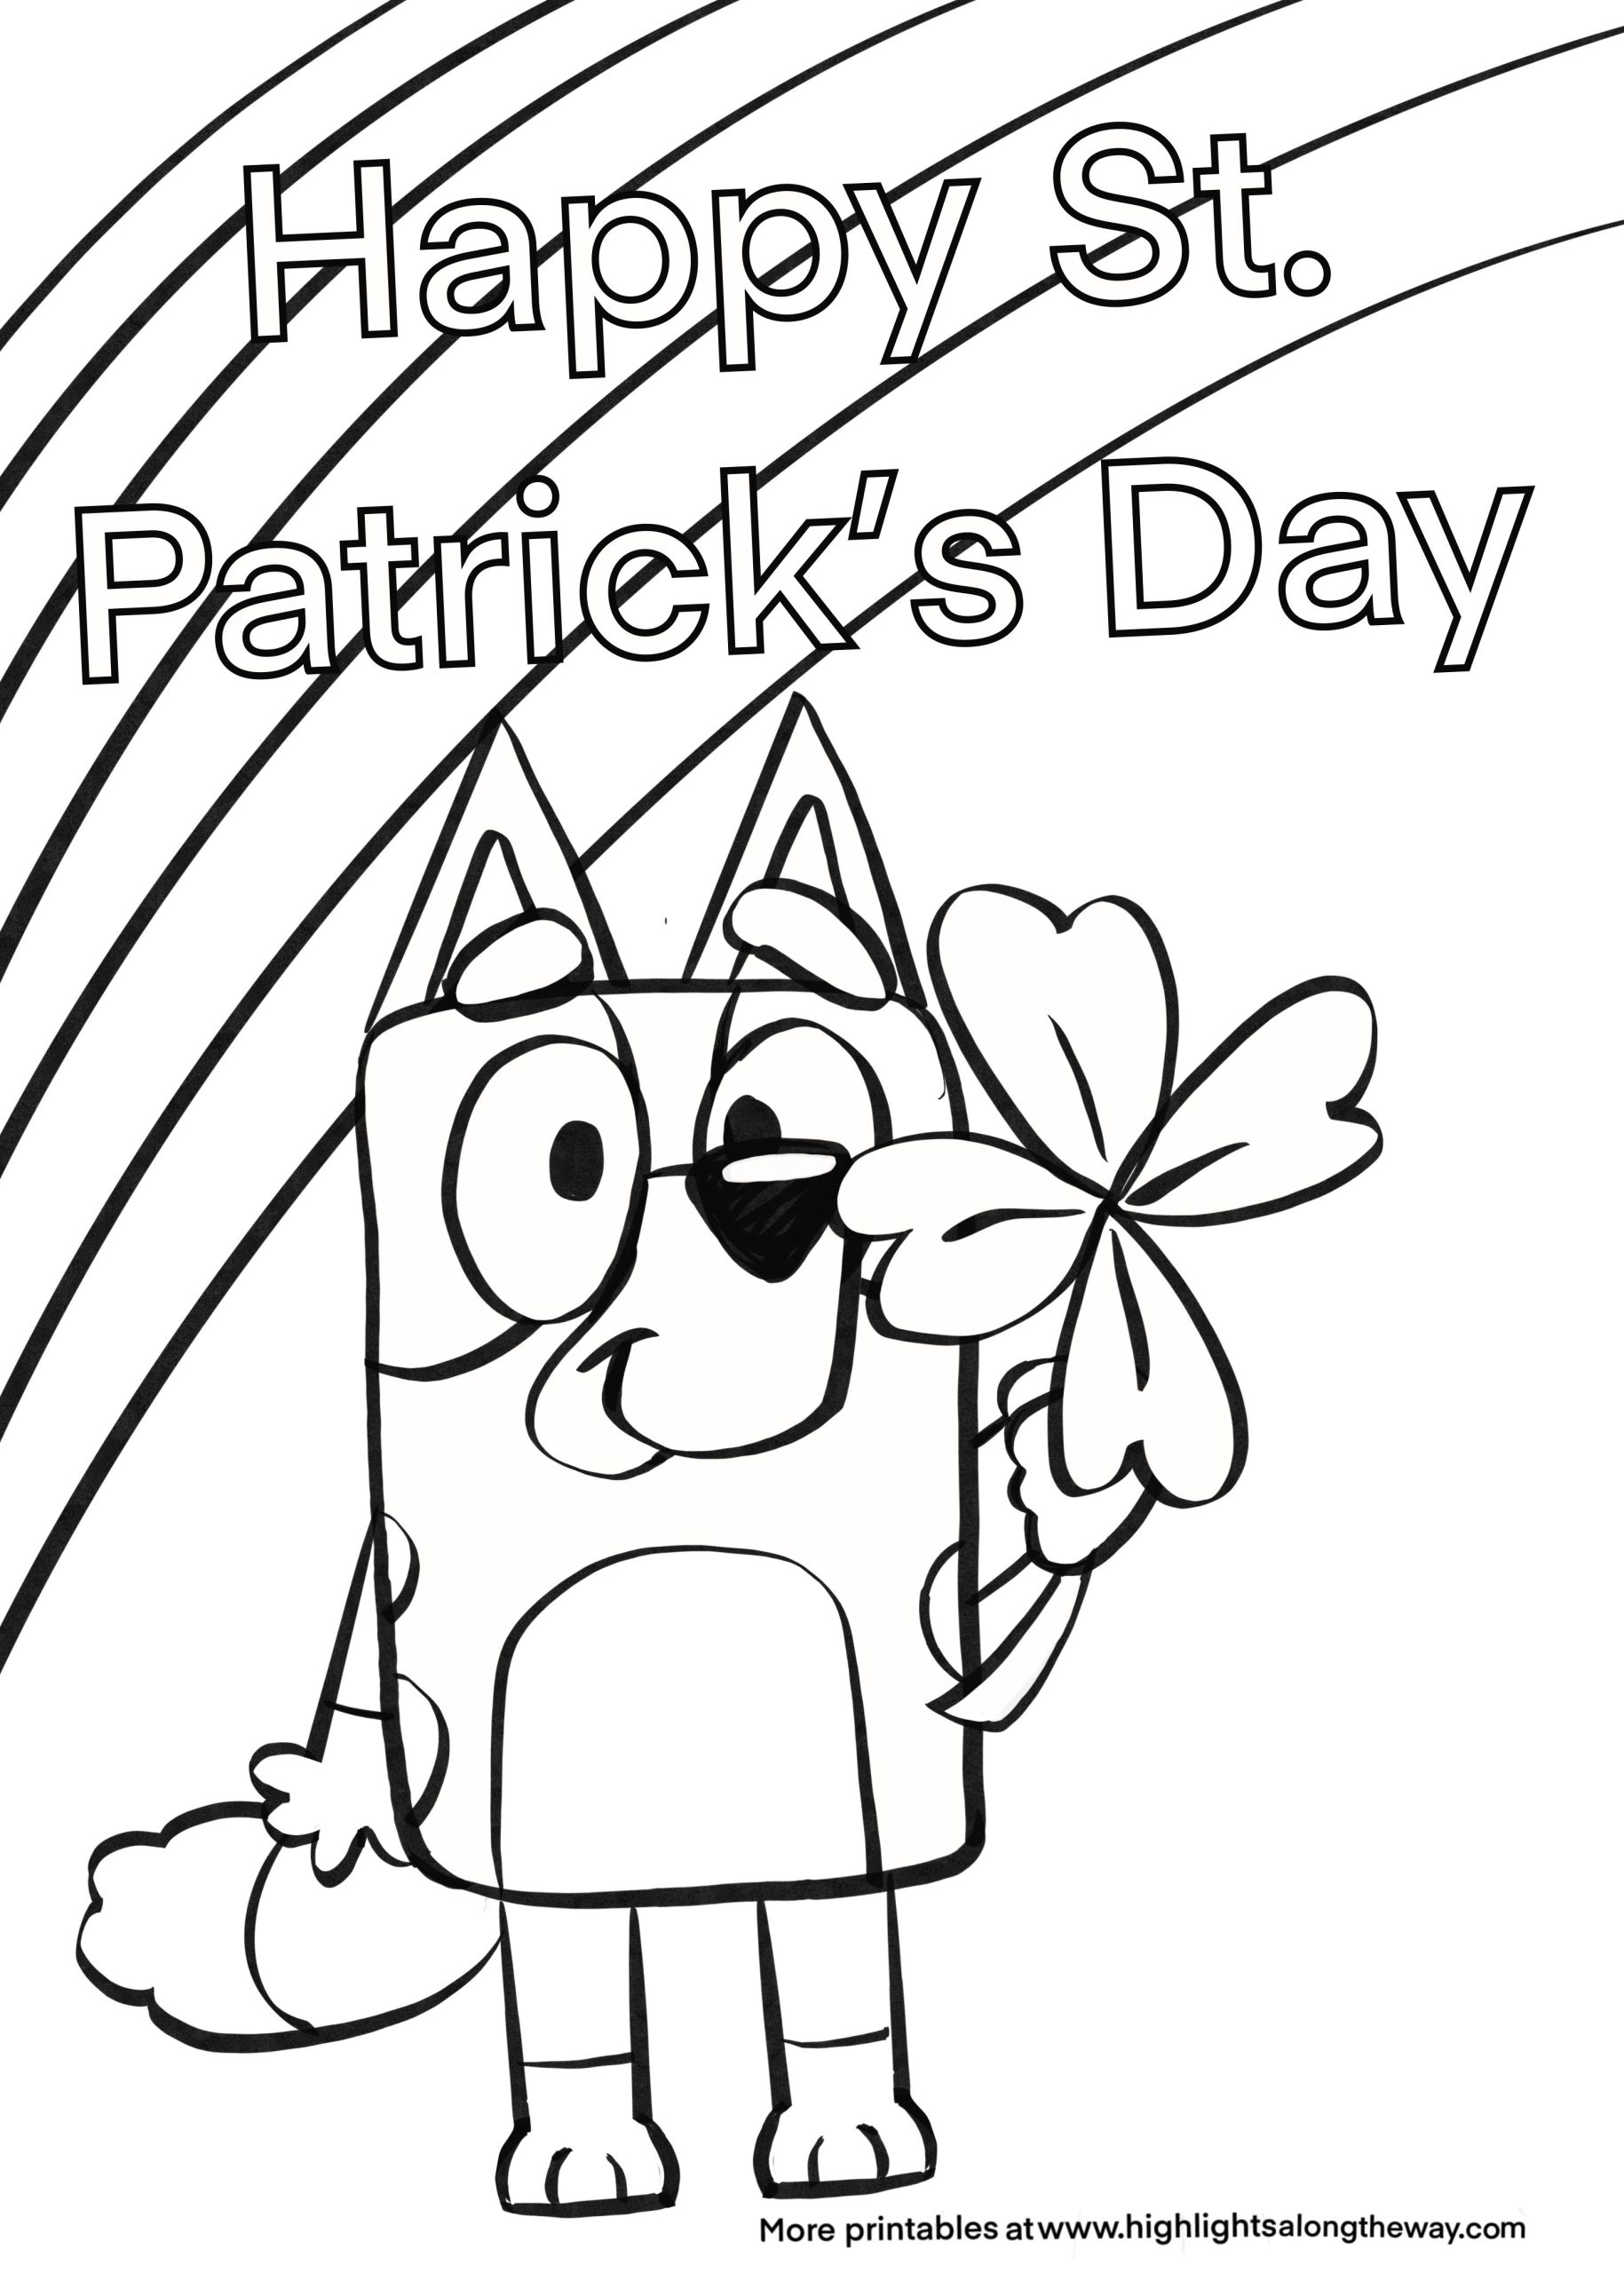 St. Patrick's Day Coloring Pages (with free printable) - Happy